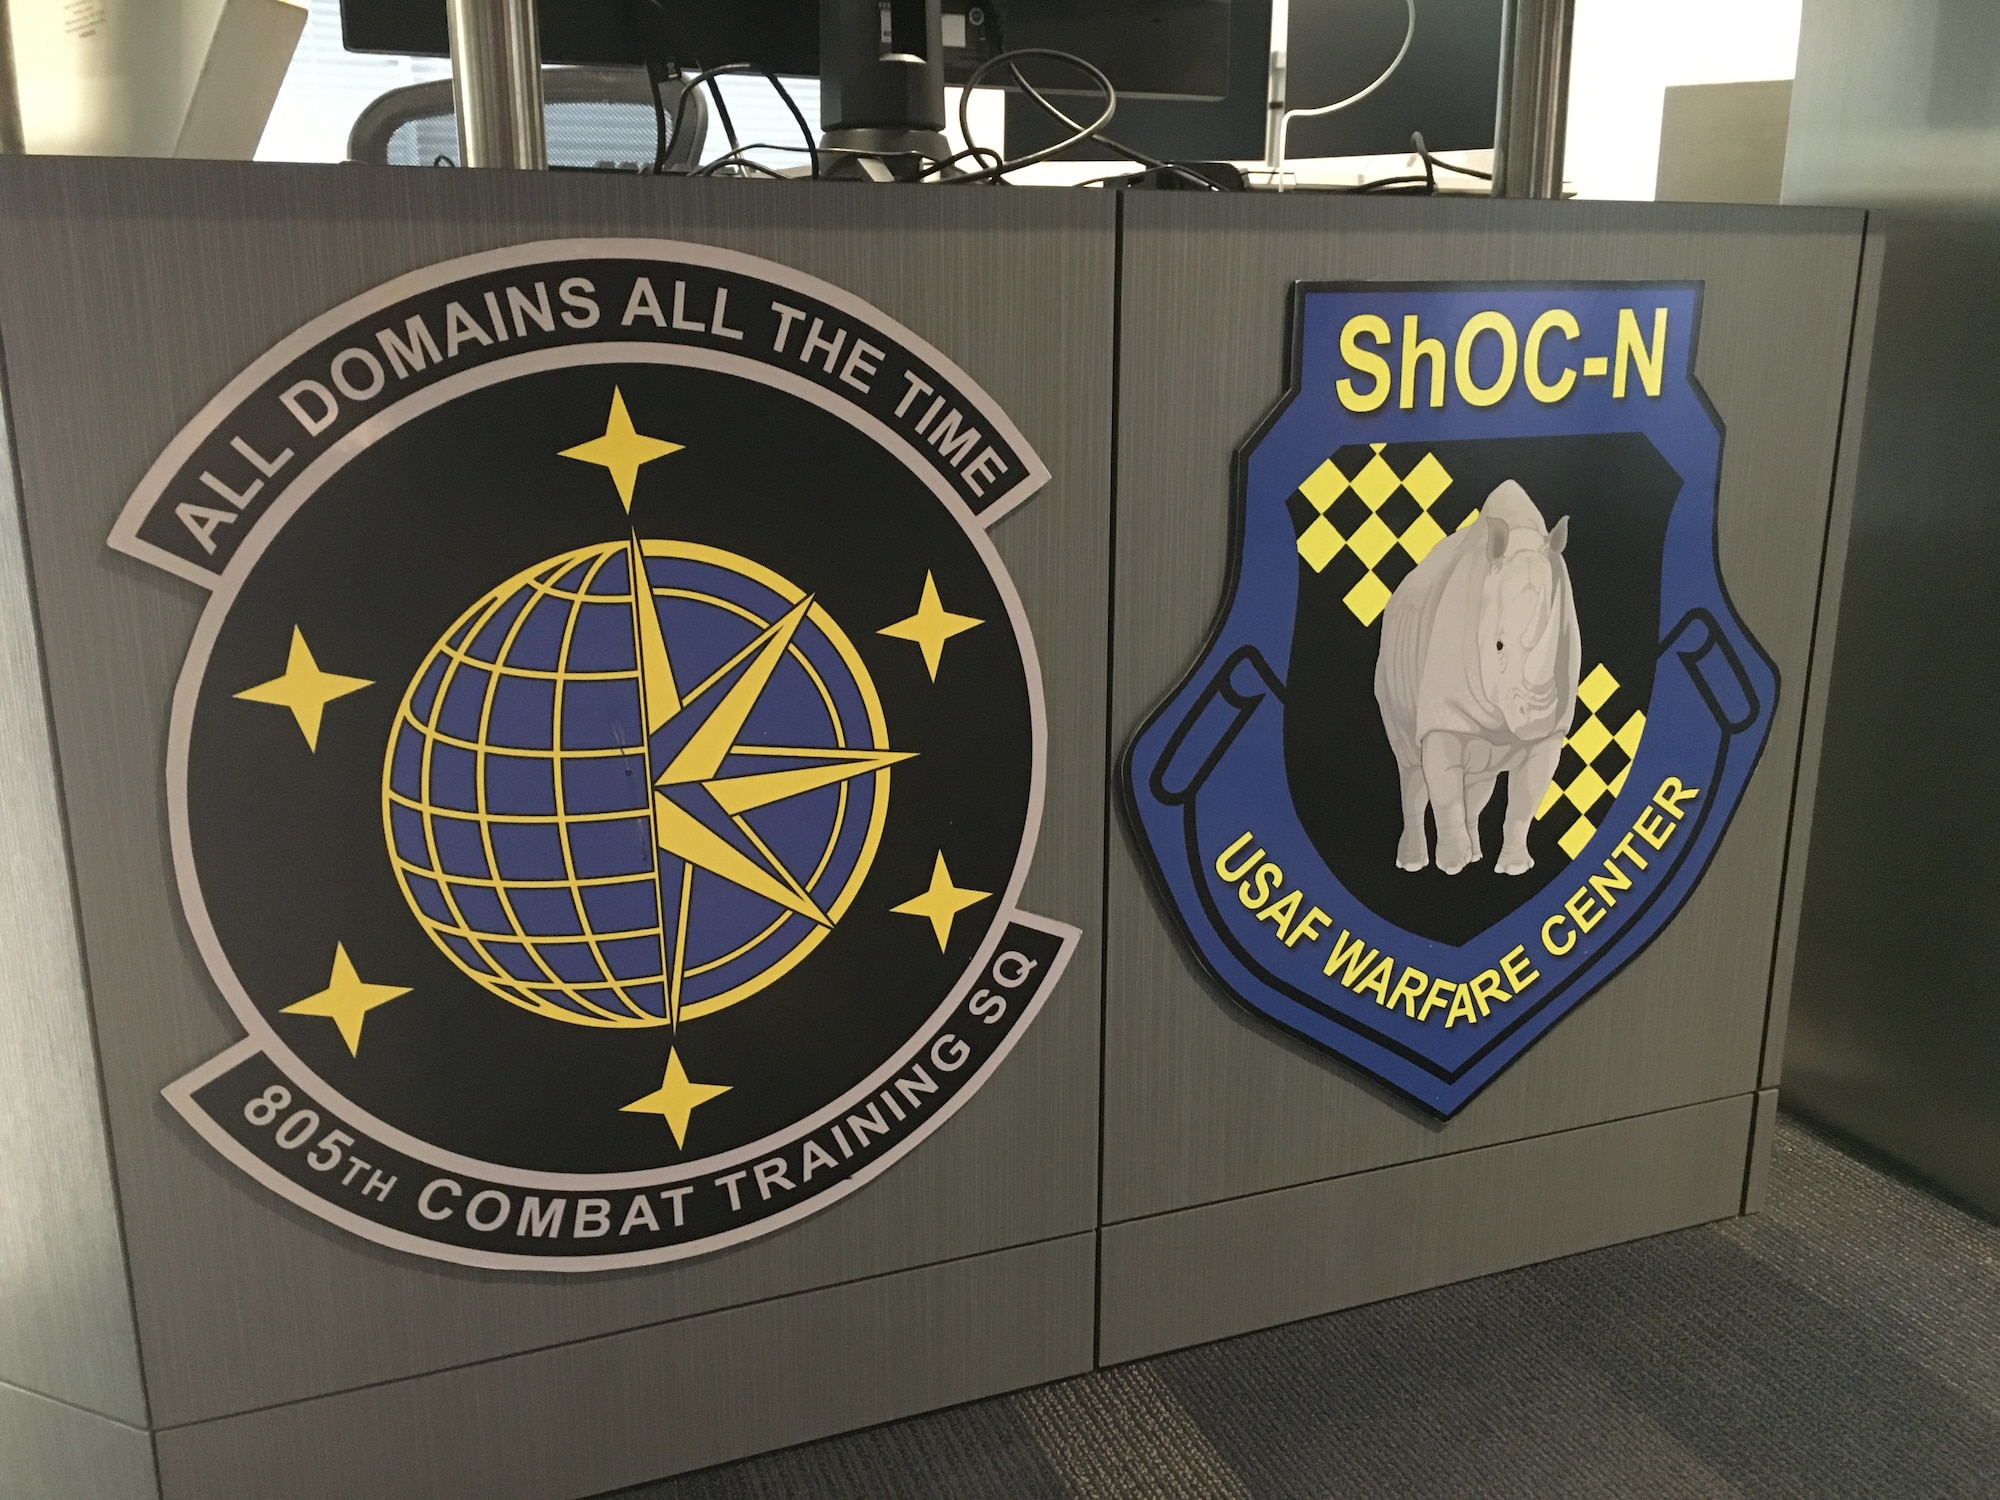 photo of two U.S. Air Force patches for the 805th Combat Training Squadron and the Shadow Operations Center-Nellis